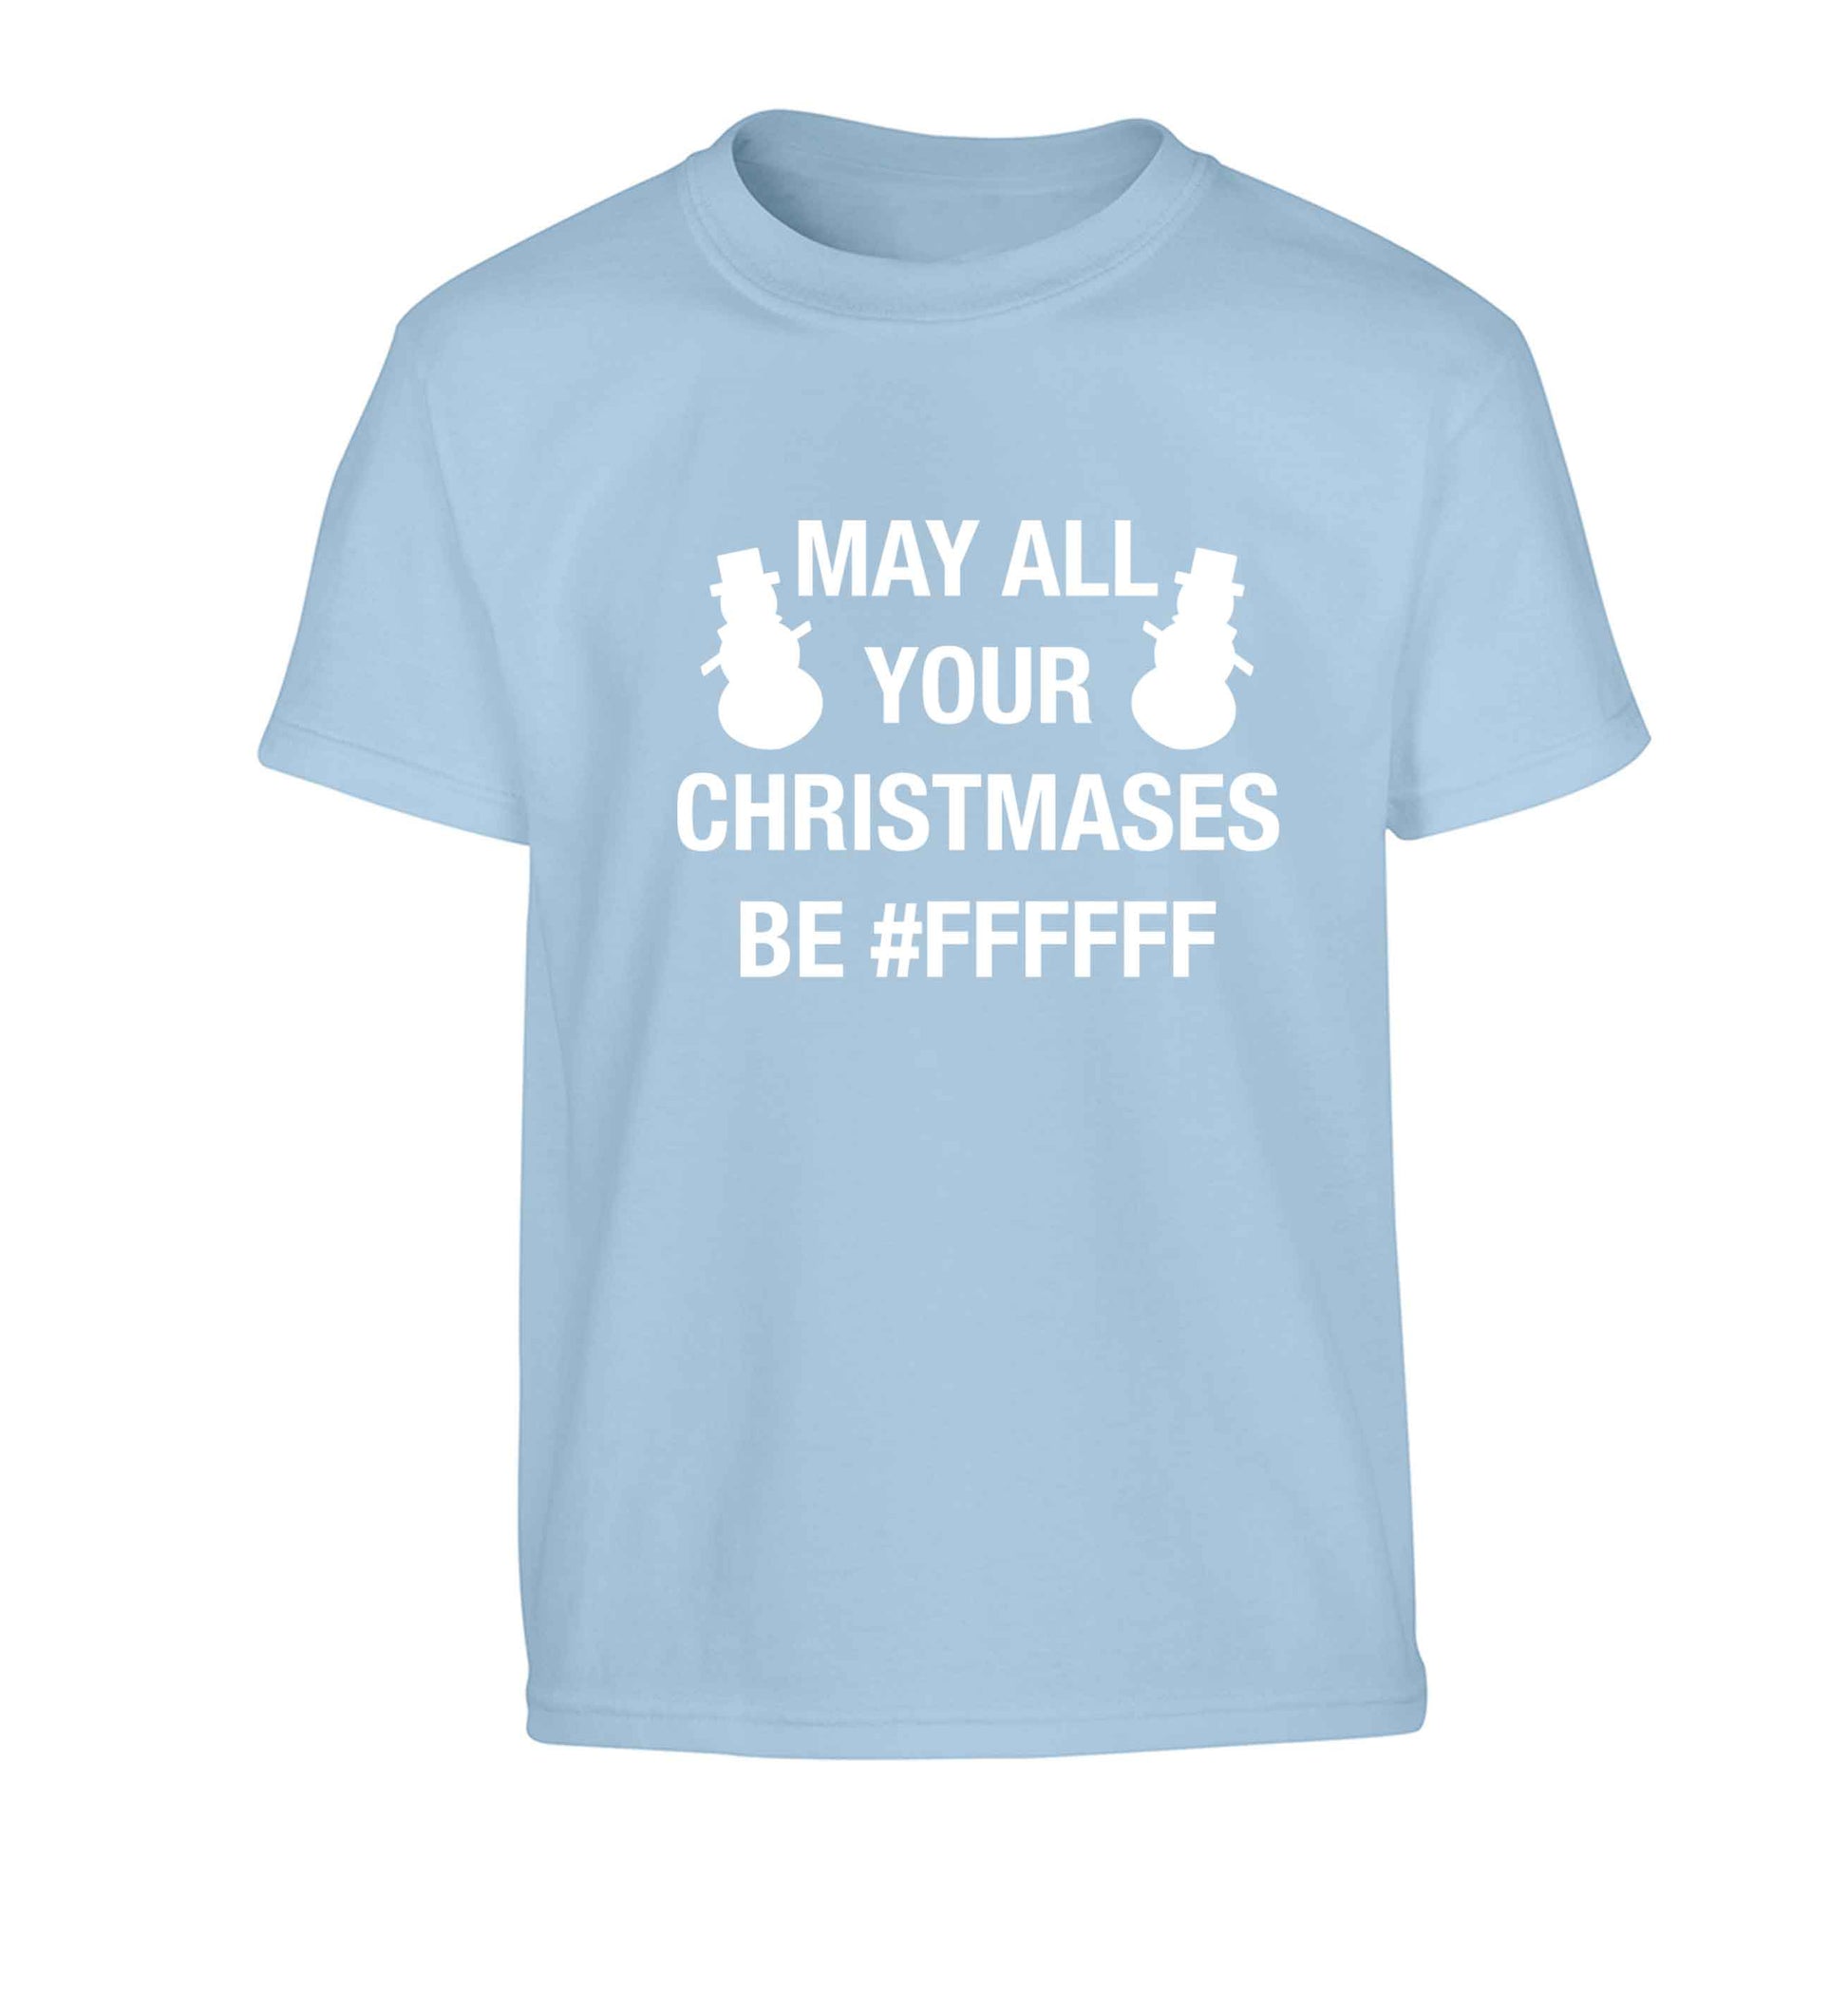 May all your Christmases be #FFFFFF Children's light blue Tshirt 12-13 Years